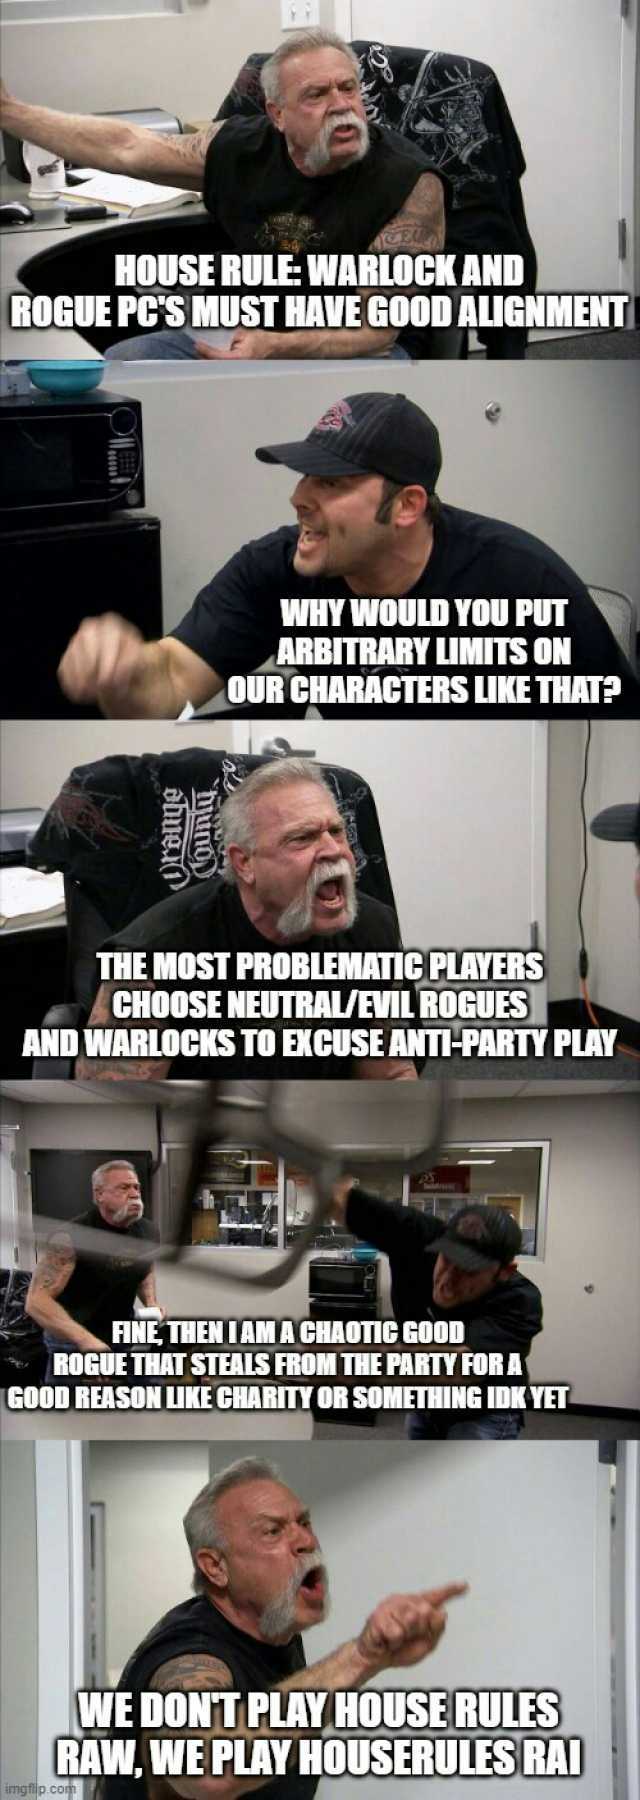 HOUSE RULE WARLOCK AND ROEUE PCSMUSTHAVE GOOD ALIGNMENTT WHY WOULD YOU PUT ARBITRARY LIMITS ON OUR CHARACTERS LIKE THAT THE MOST PROBLEMATICPLAYERS CHOOSE NEUTRAL/EVIL ROGUES AND WARLOCKS TO EKCUSE ANTI-PARTY PLAY FINE THENTAM A C